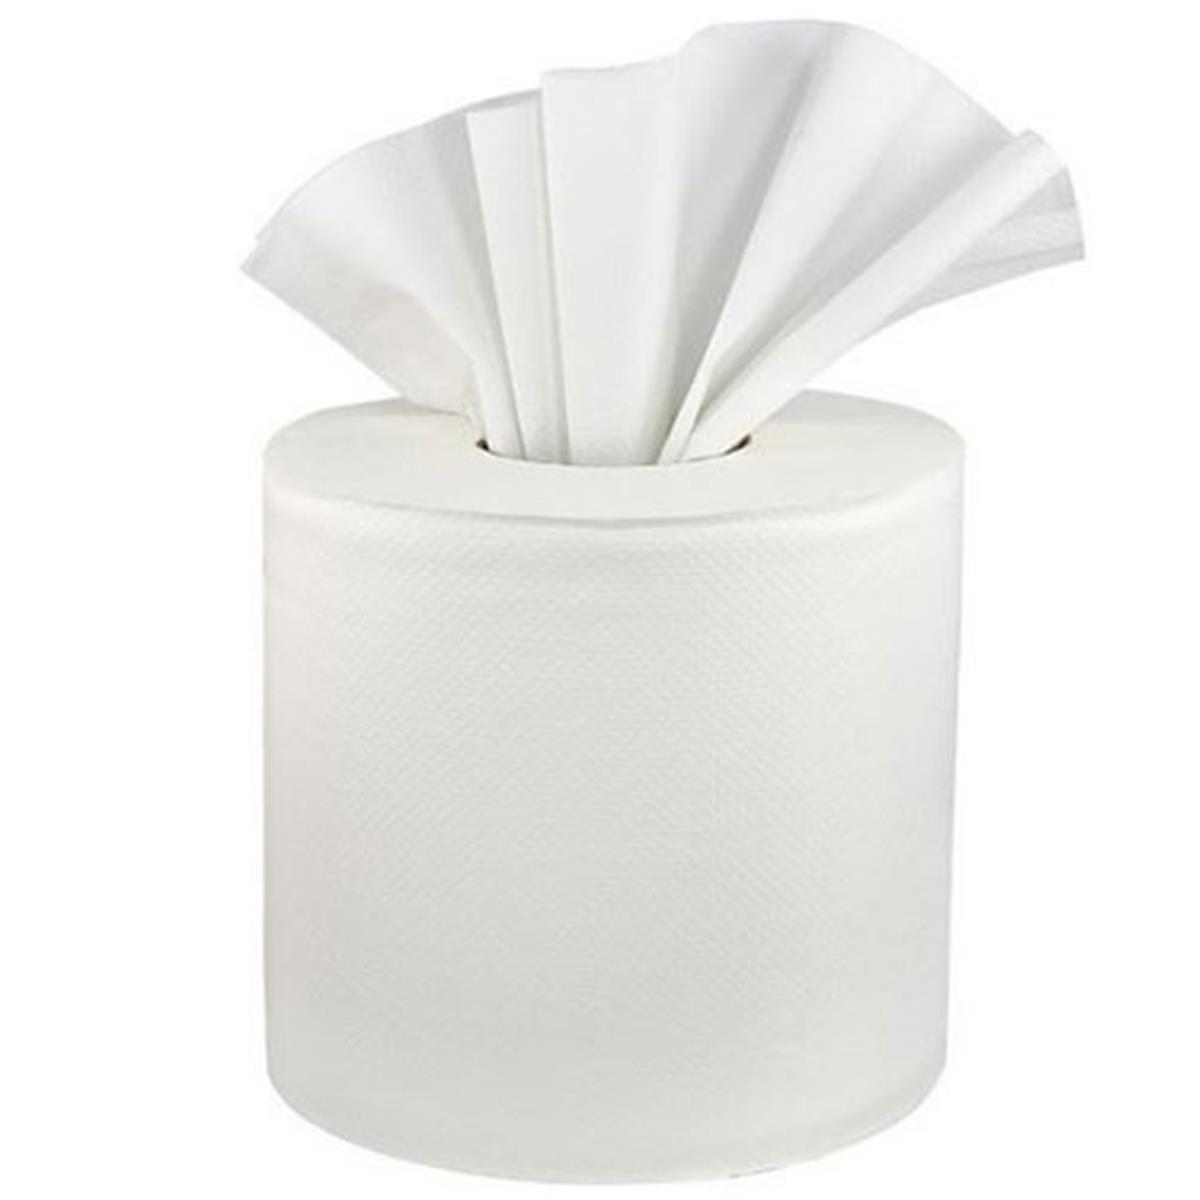 45507 Pec 8 In. X 600 Ft. White 2 Ply Center Pull Towel - Pack Of 6